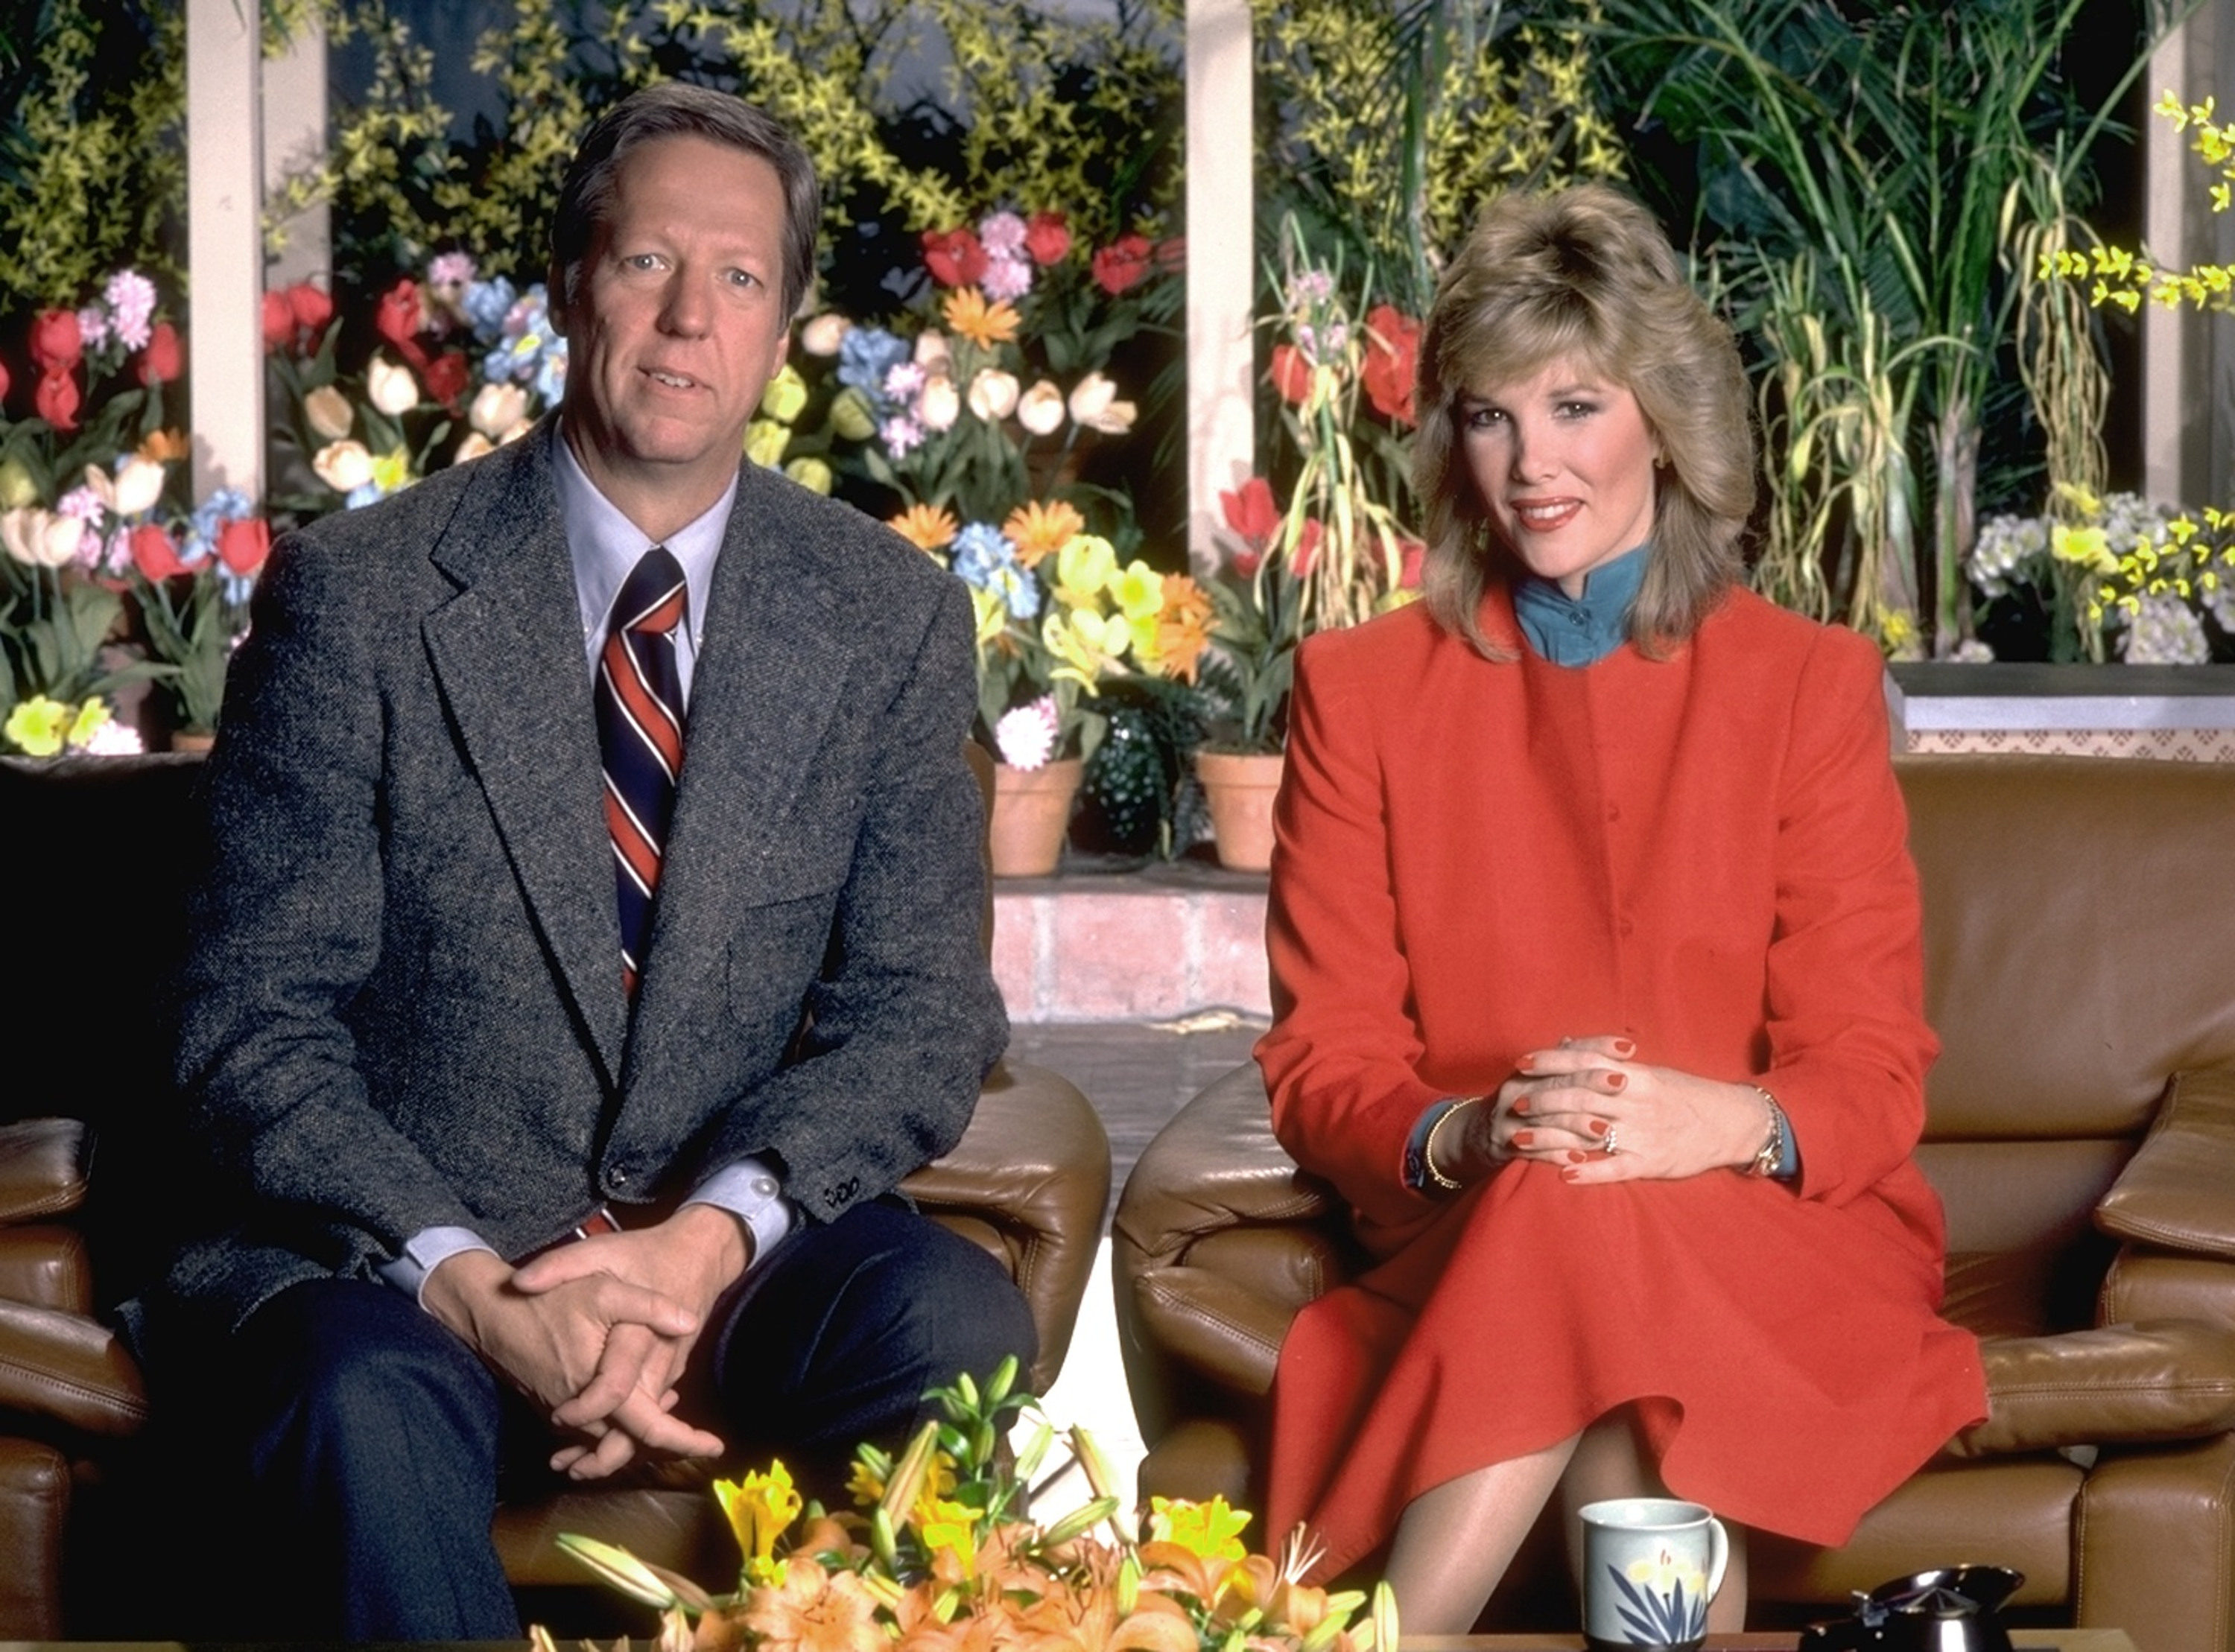 David Hartman and Joan Lunden on “Good Morning America” on May 6, 1982 | Source: Getty Images